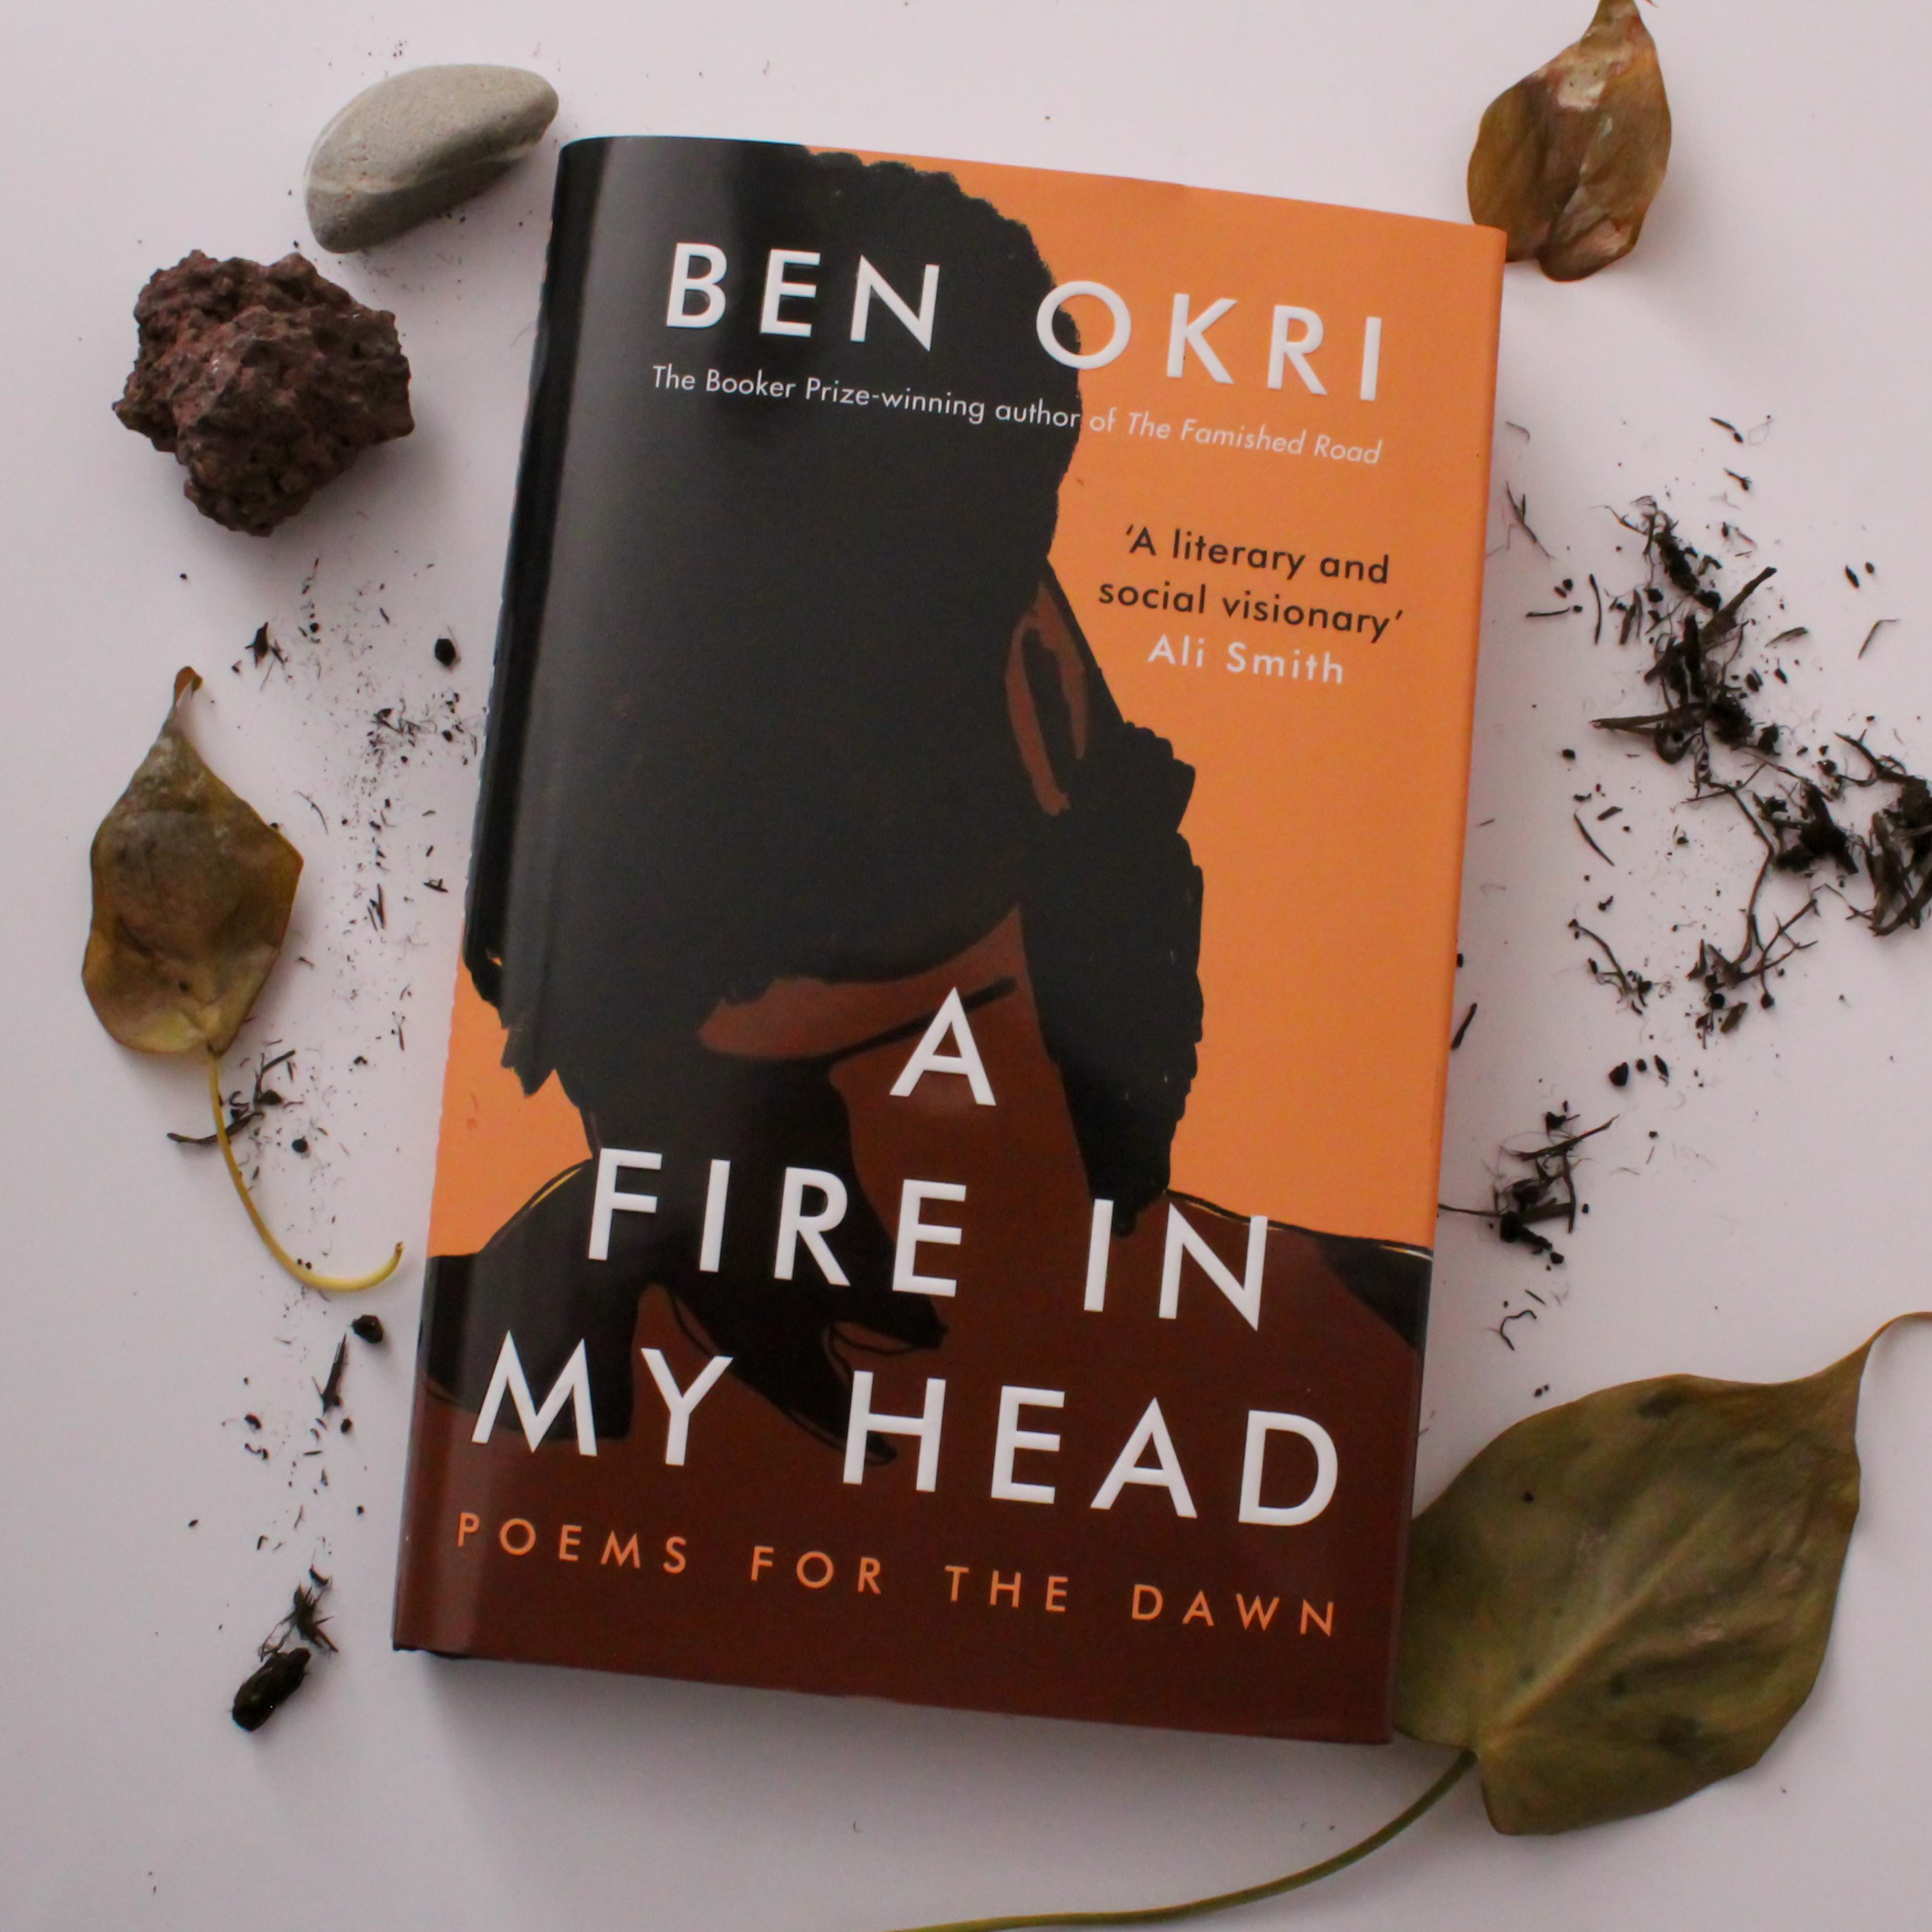 Is This The Best Poetry Book For 21 A Fire In My Head By Ben Okri Review Poetpri